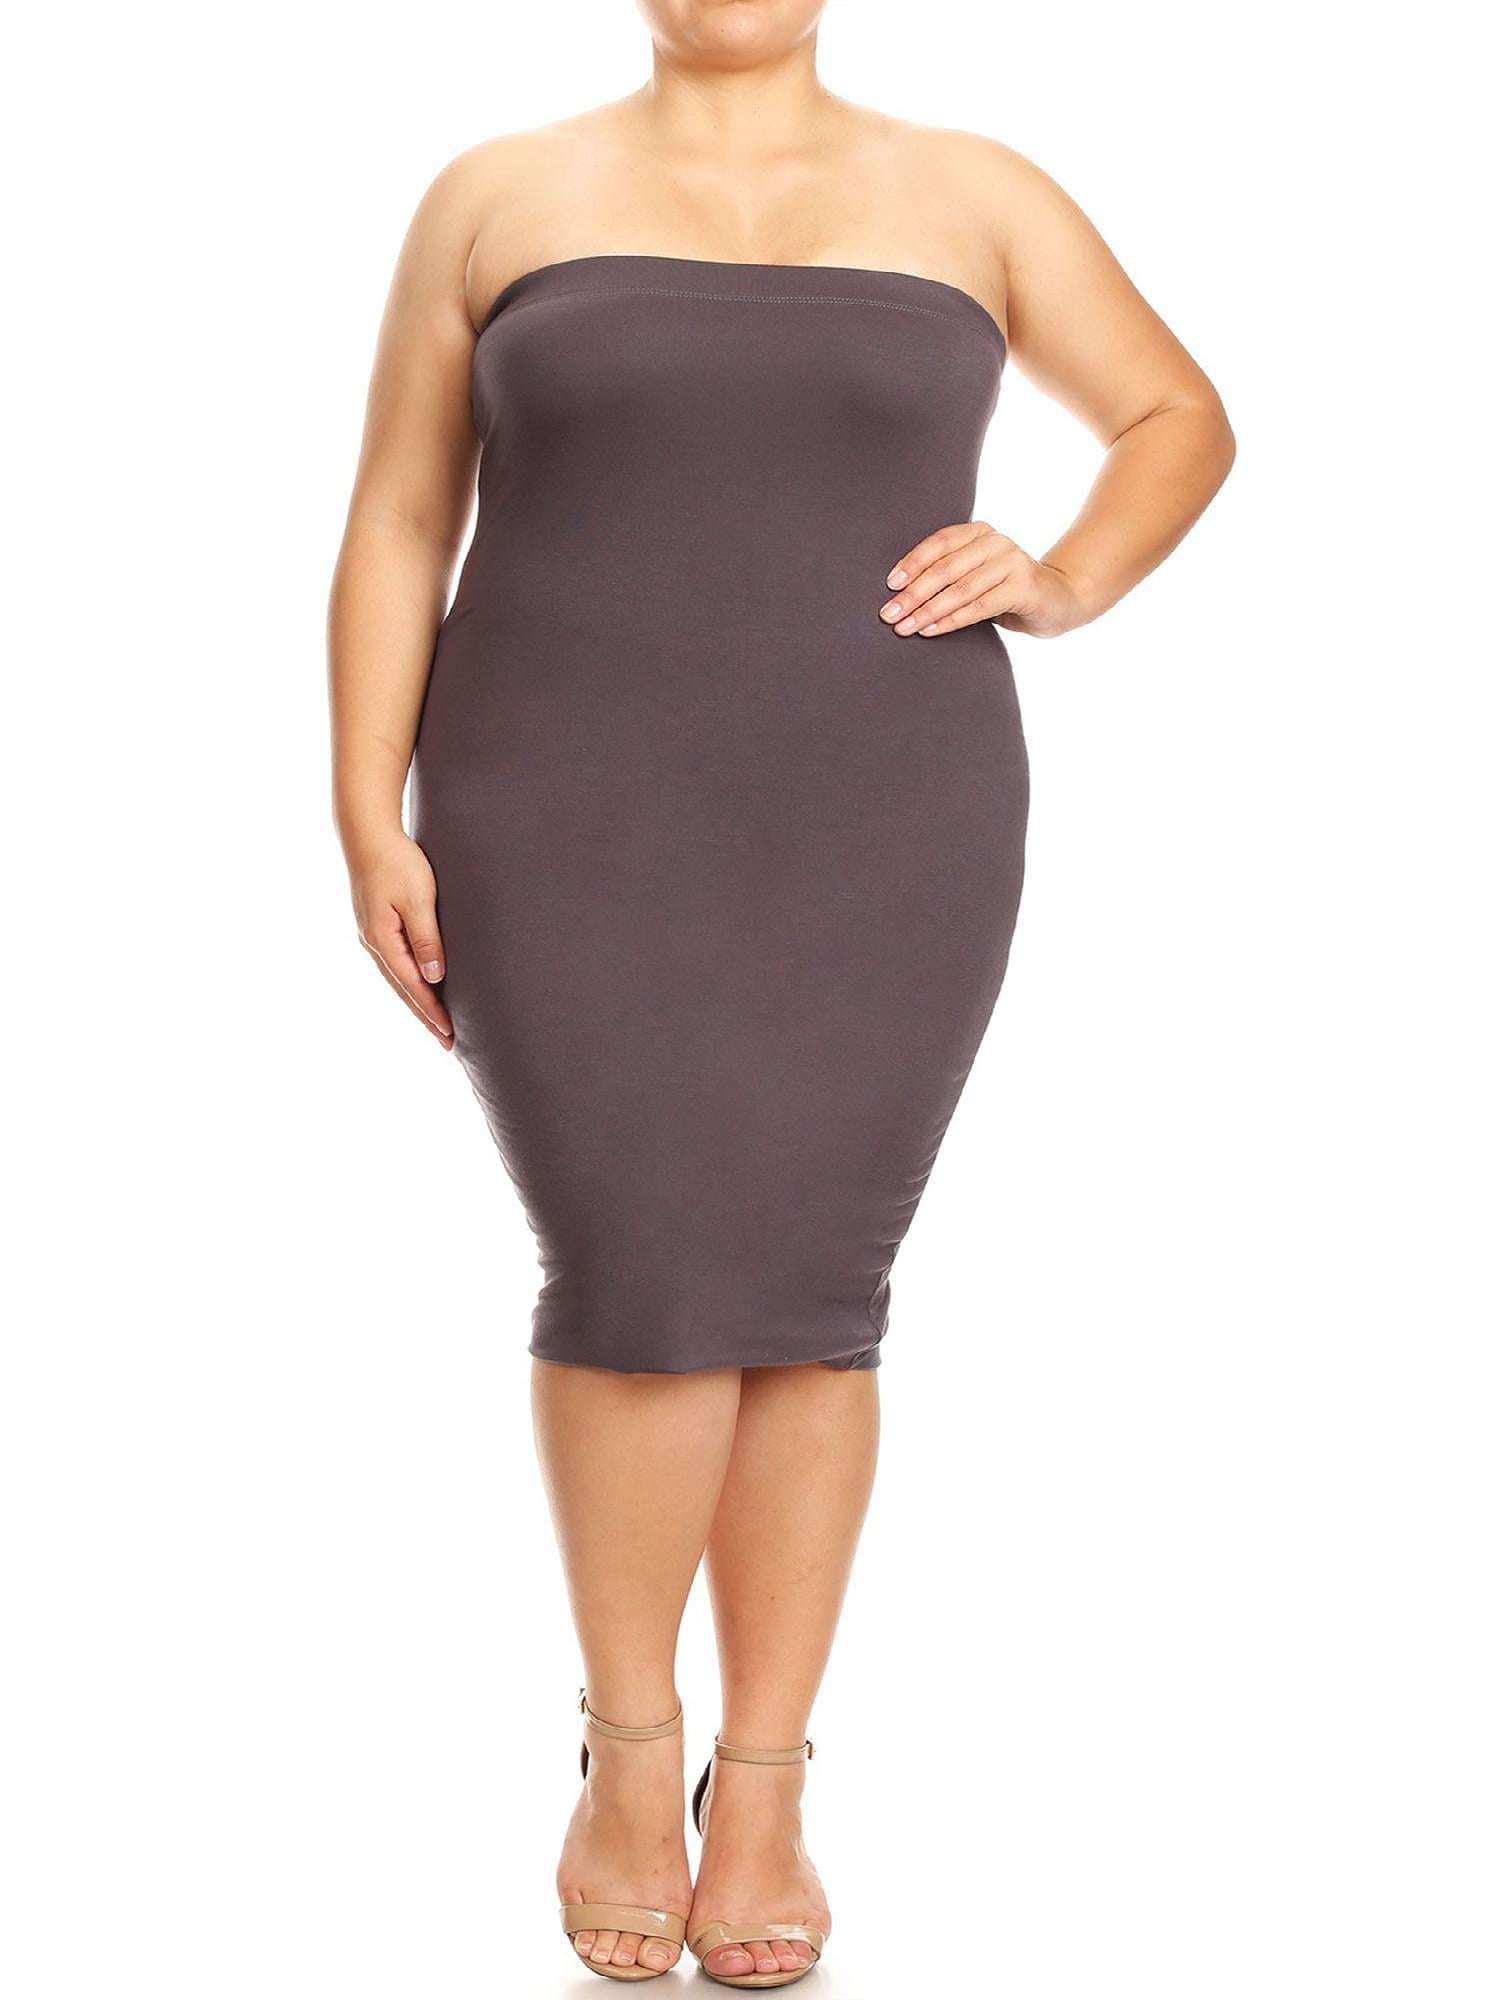 Mean does it bodycon usa what dress